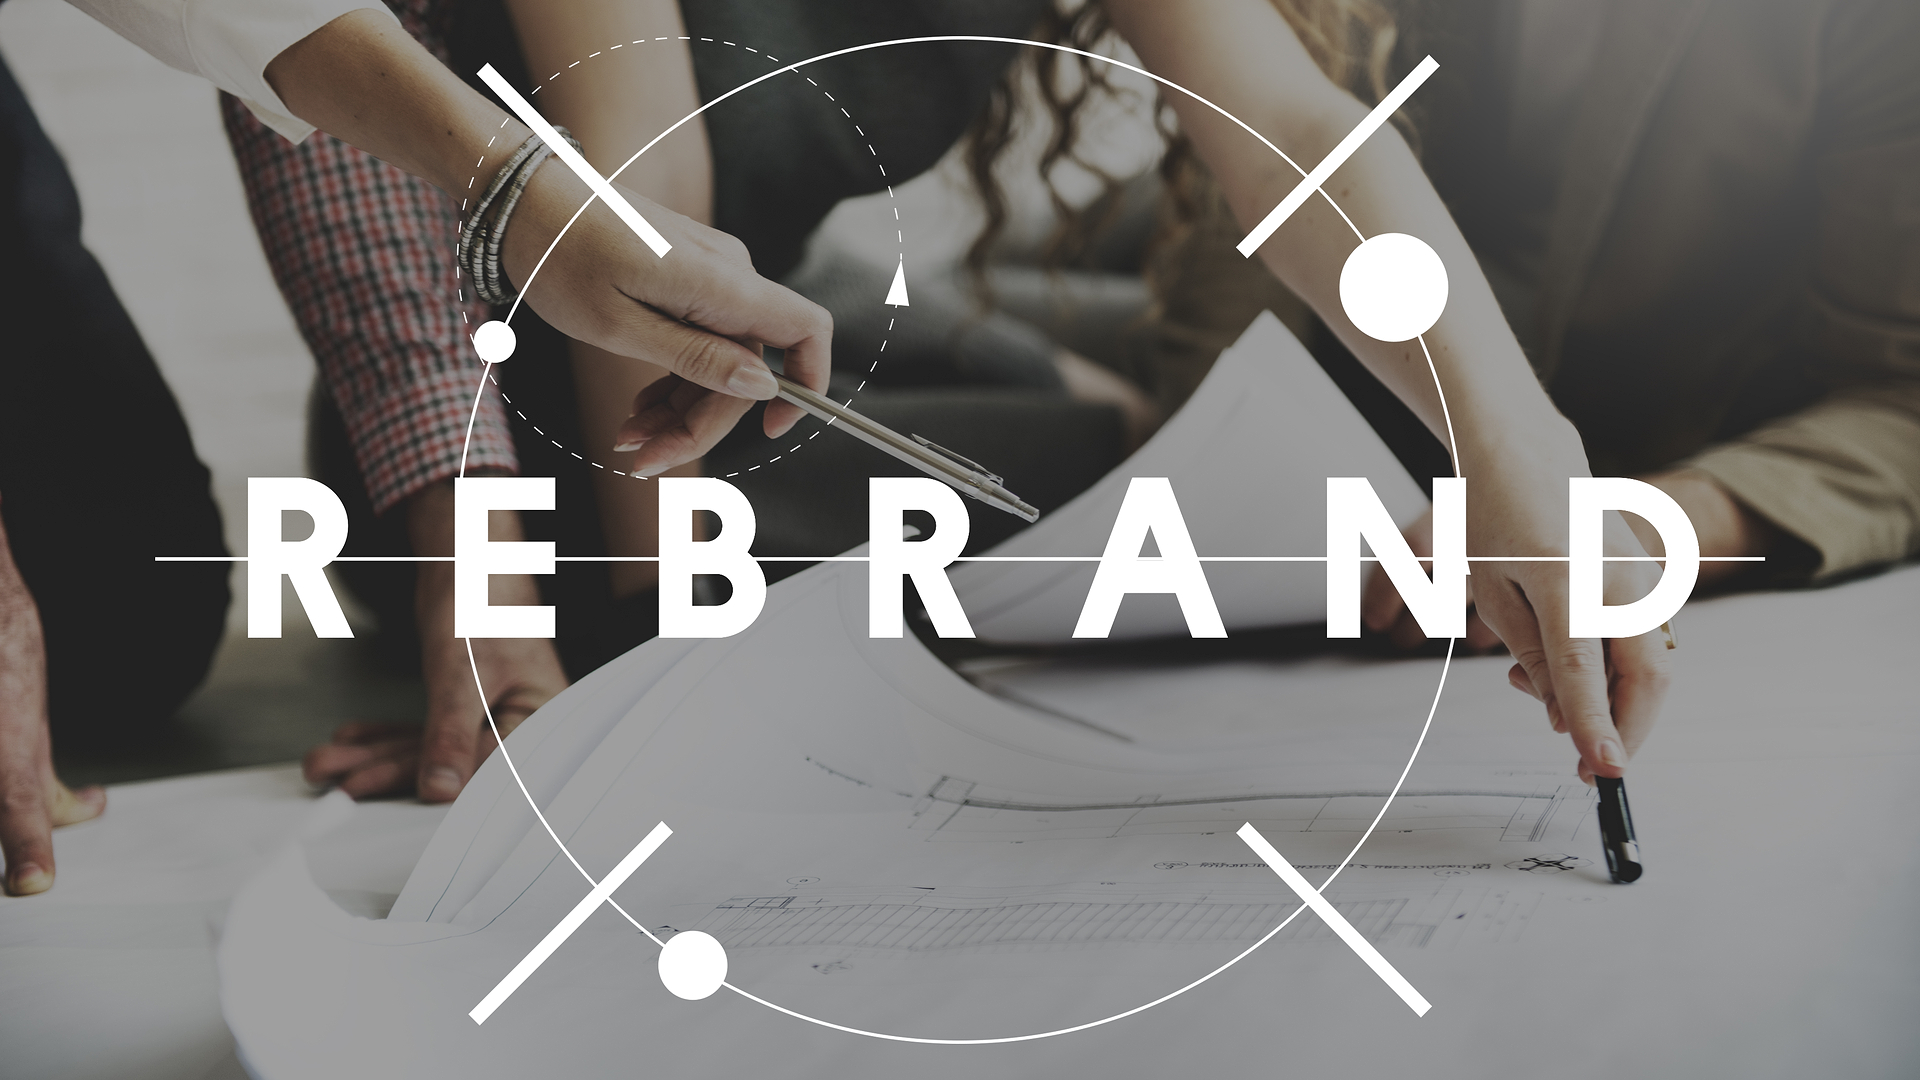 How to rebrand your business on social media